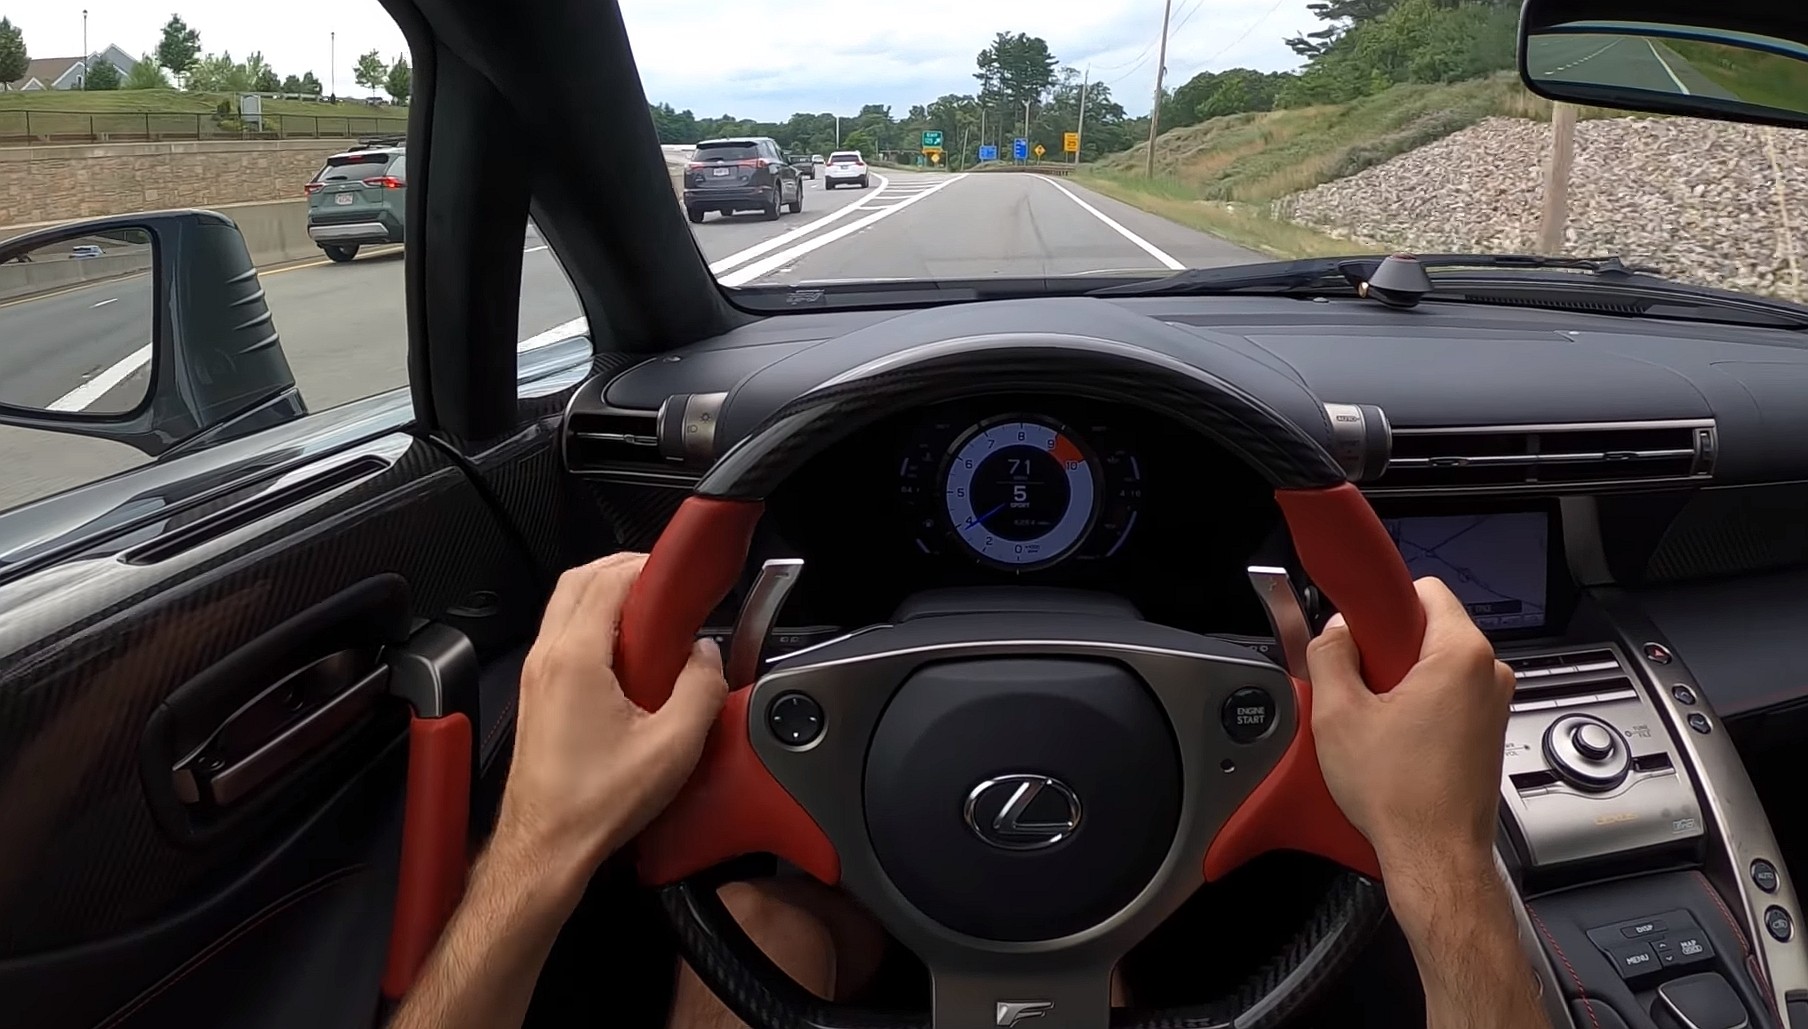 Pov Review Shows Why The Lexus Lfa Is The Greatest Japanese Supercar